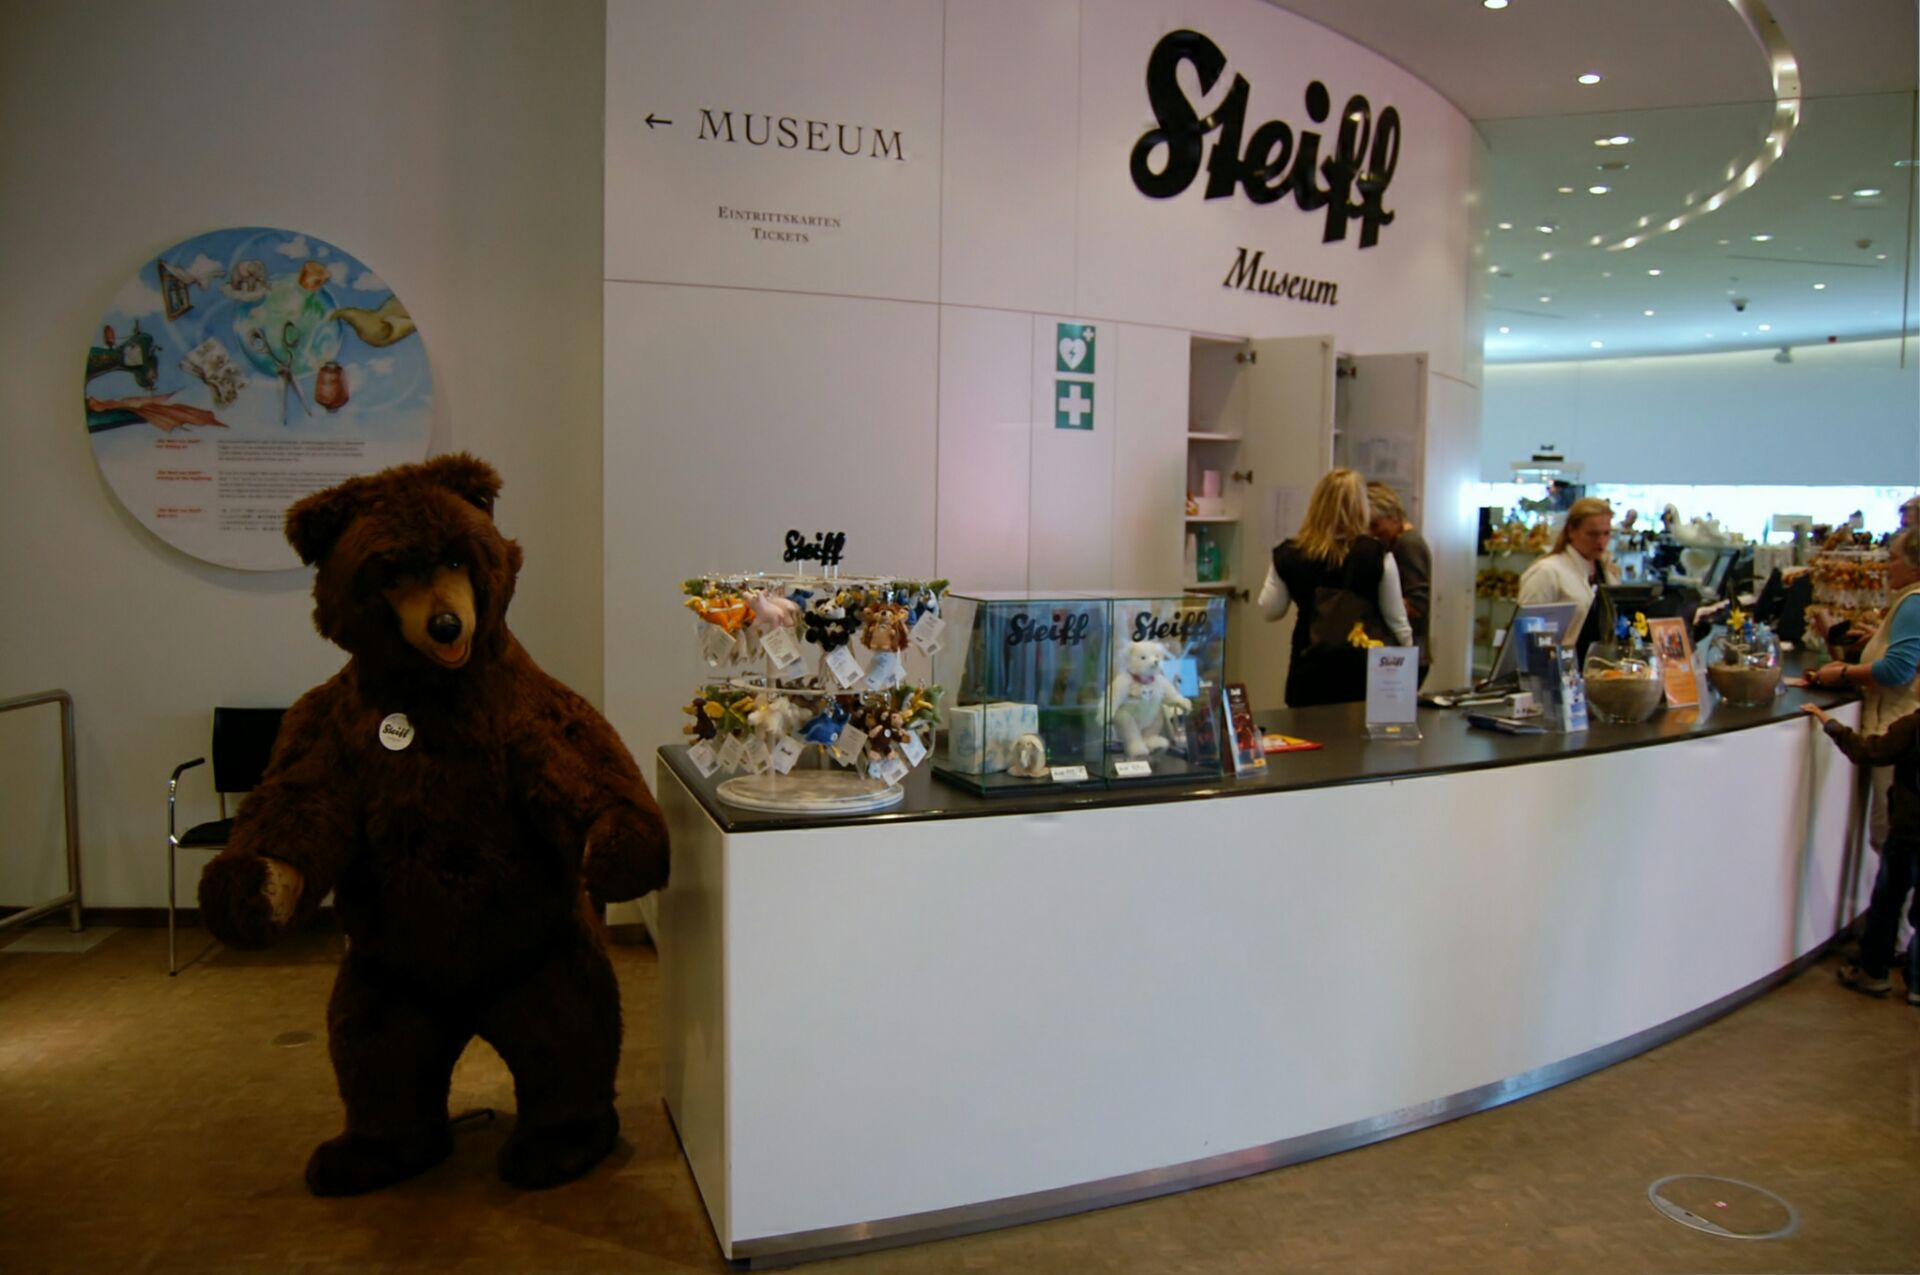 Steiff Museum attraction reviews - Steiff Museum tickets - Steiff Museum  discounts - Steiff Museum transportation, address, opening hours -  attractions, hotels, and food near Steiff Museum - Trip.com